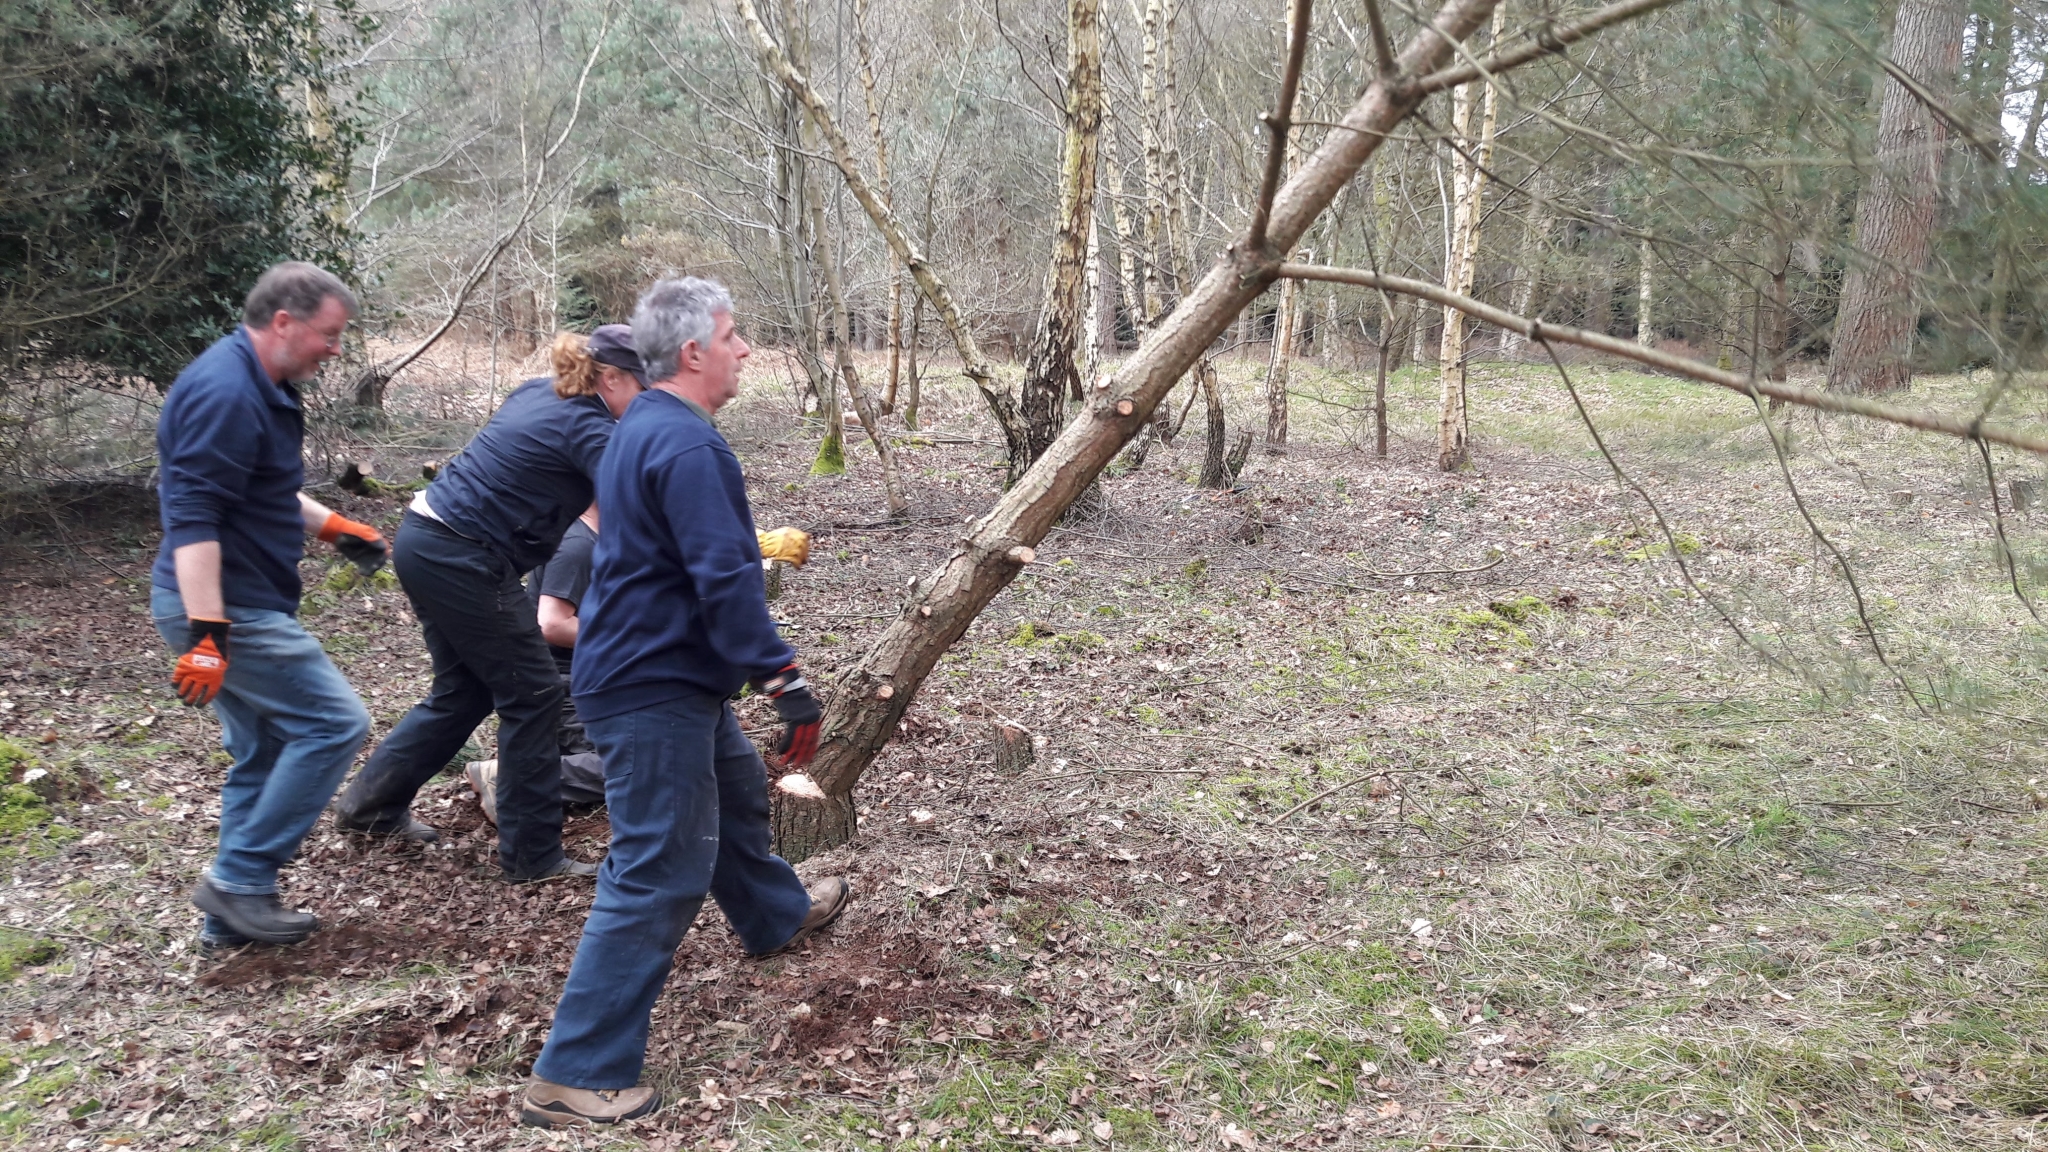 A photo from the FoTF Conservation Event - April 2018 - Improving habitat at High Lodge : The volunteers stand back as the tree falls to the ground